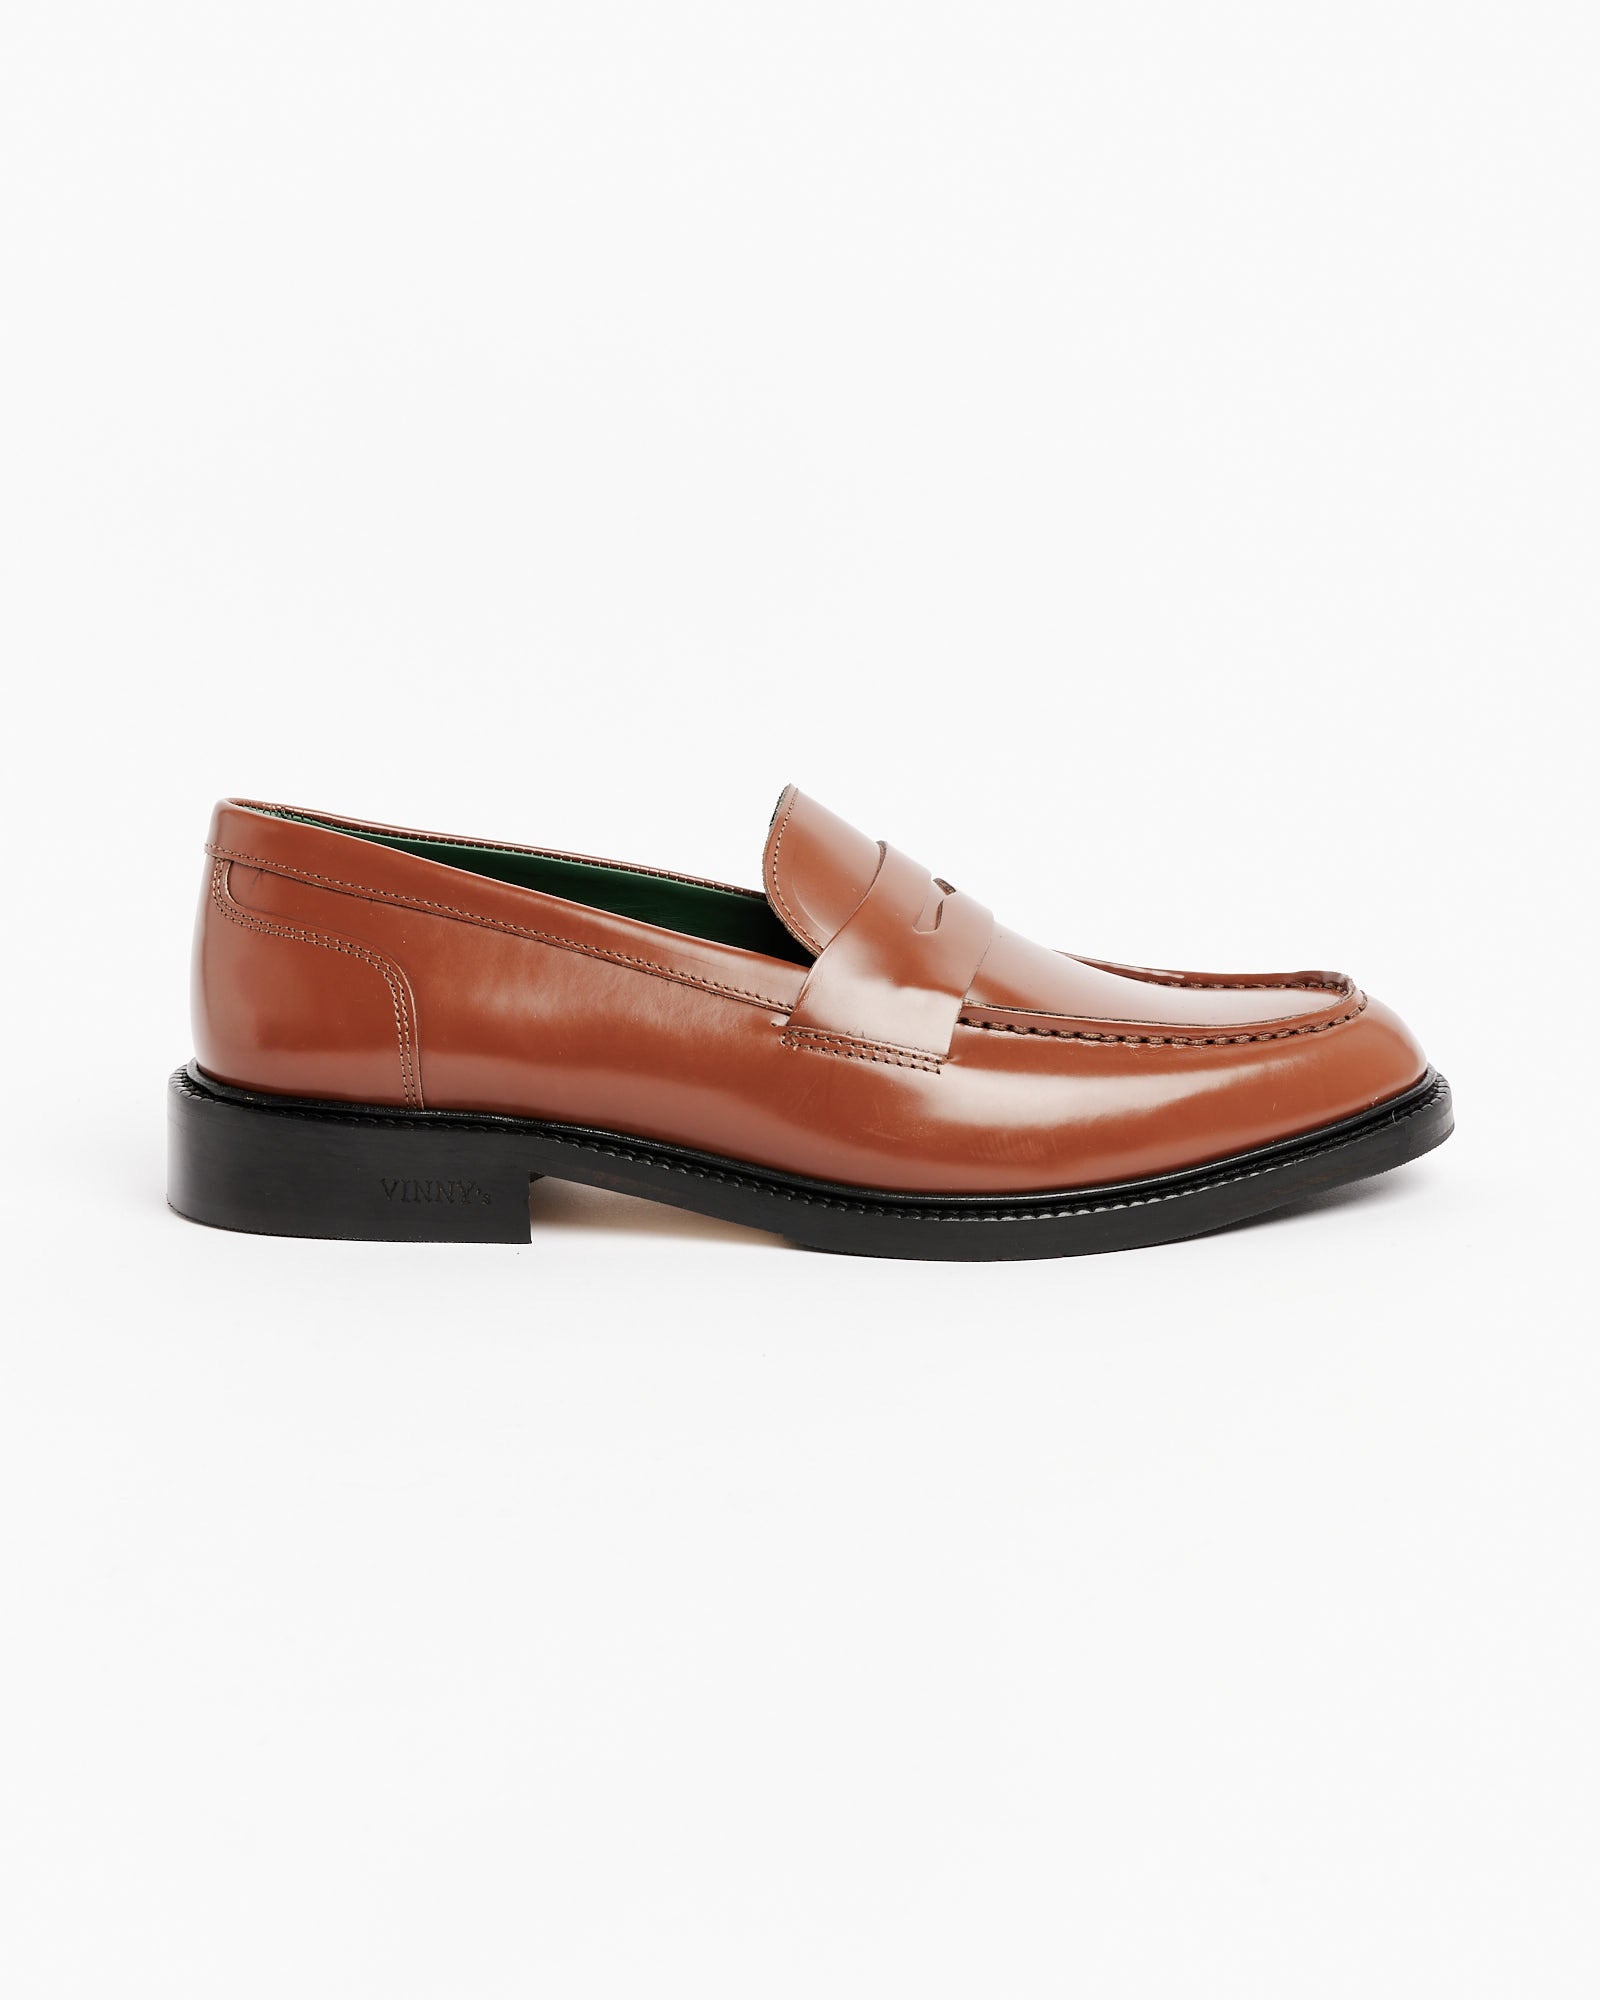 Townee Penny Loafer in Cognac